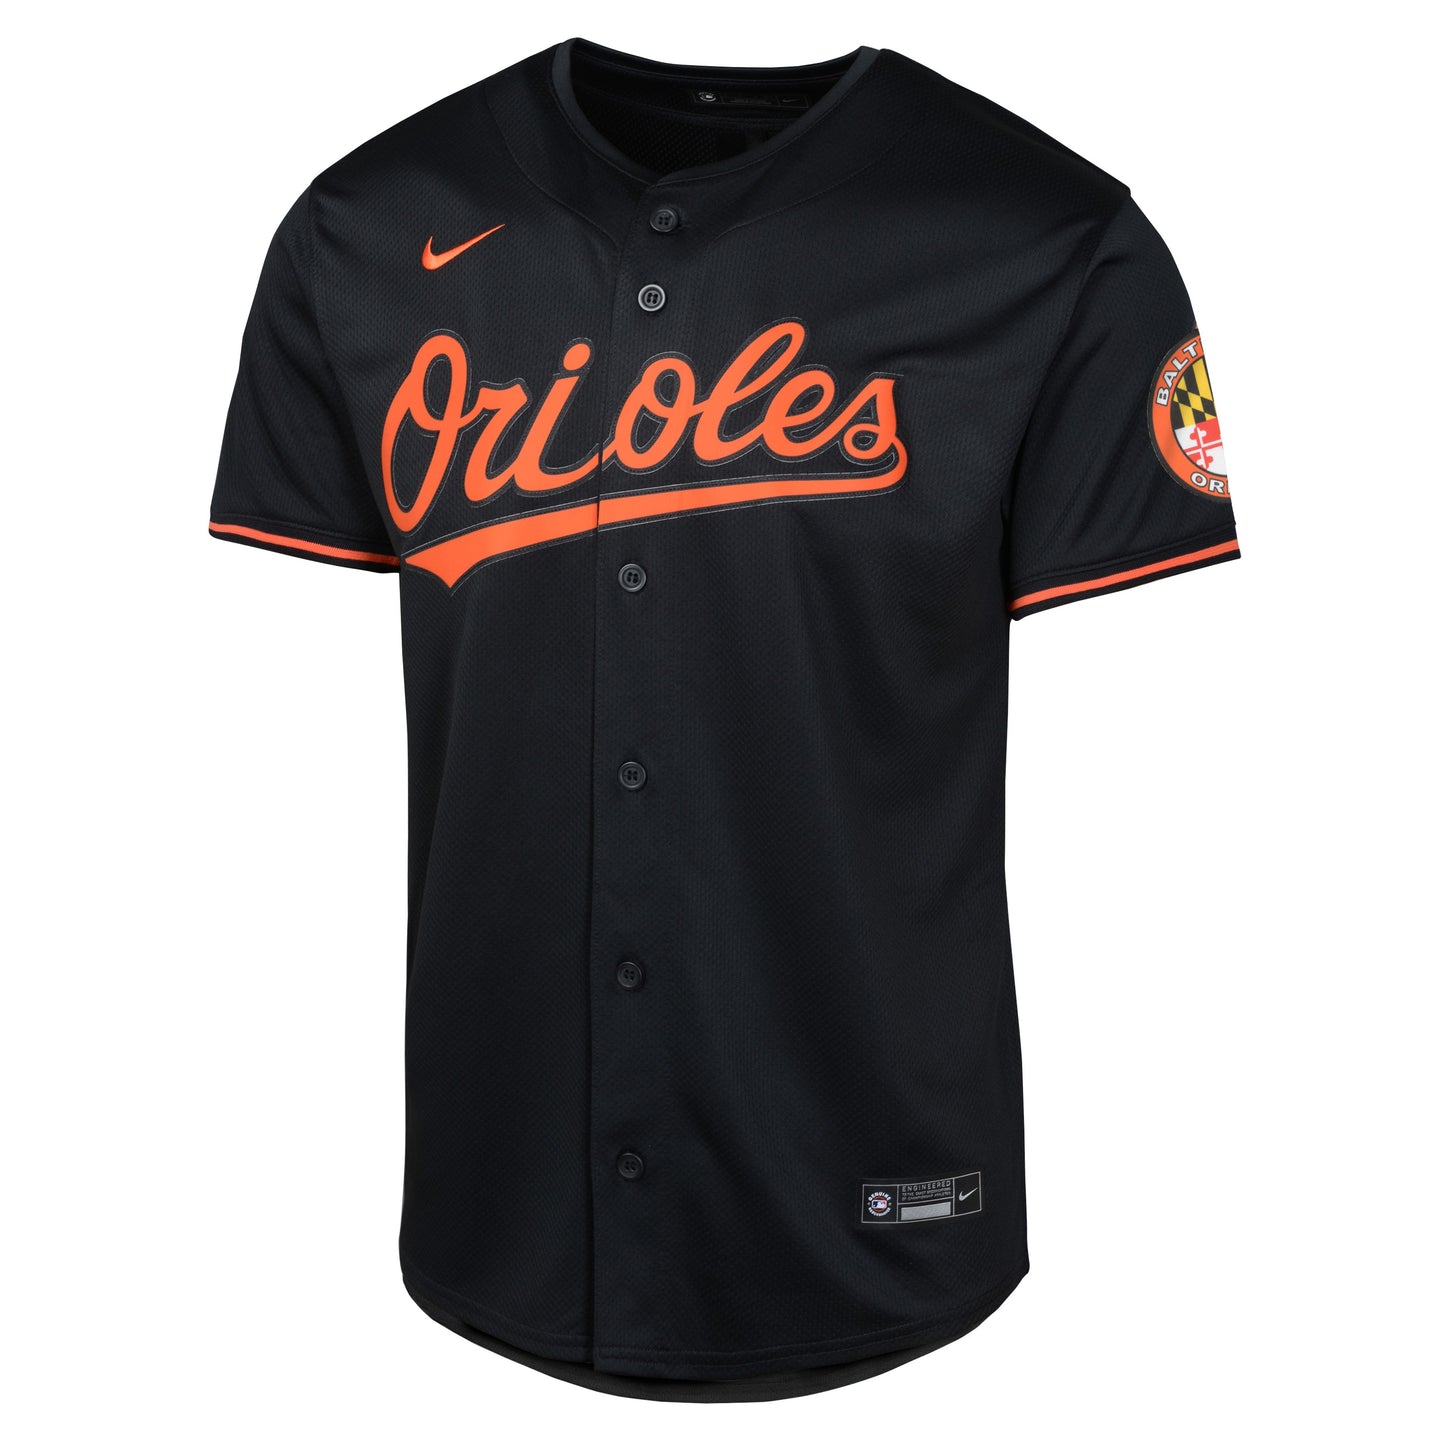 Youth Baltimore Orioles NIKE Black Alternate Limited Blank Replica Jersey